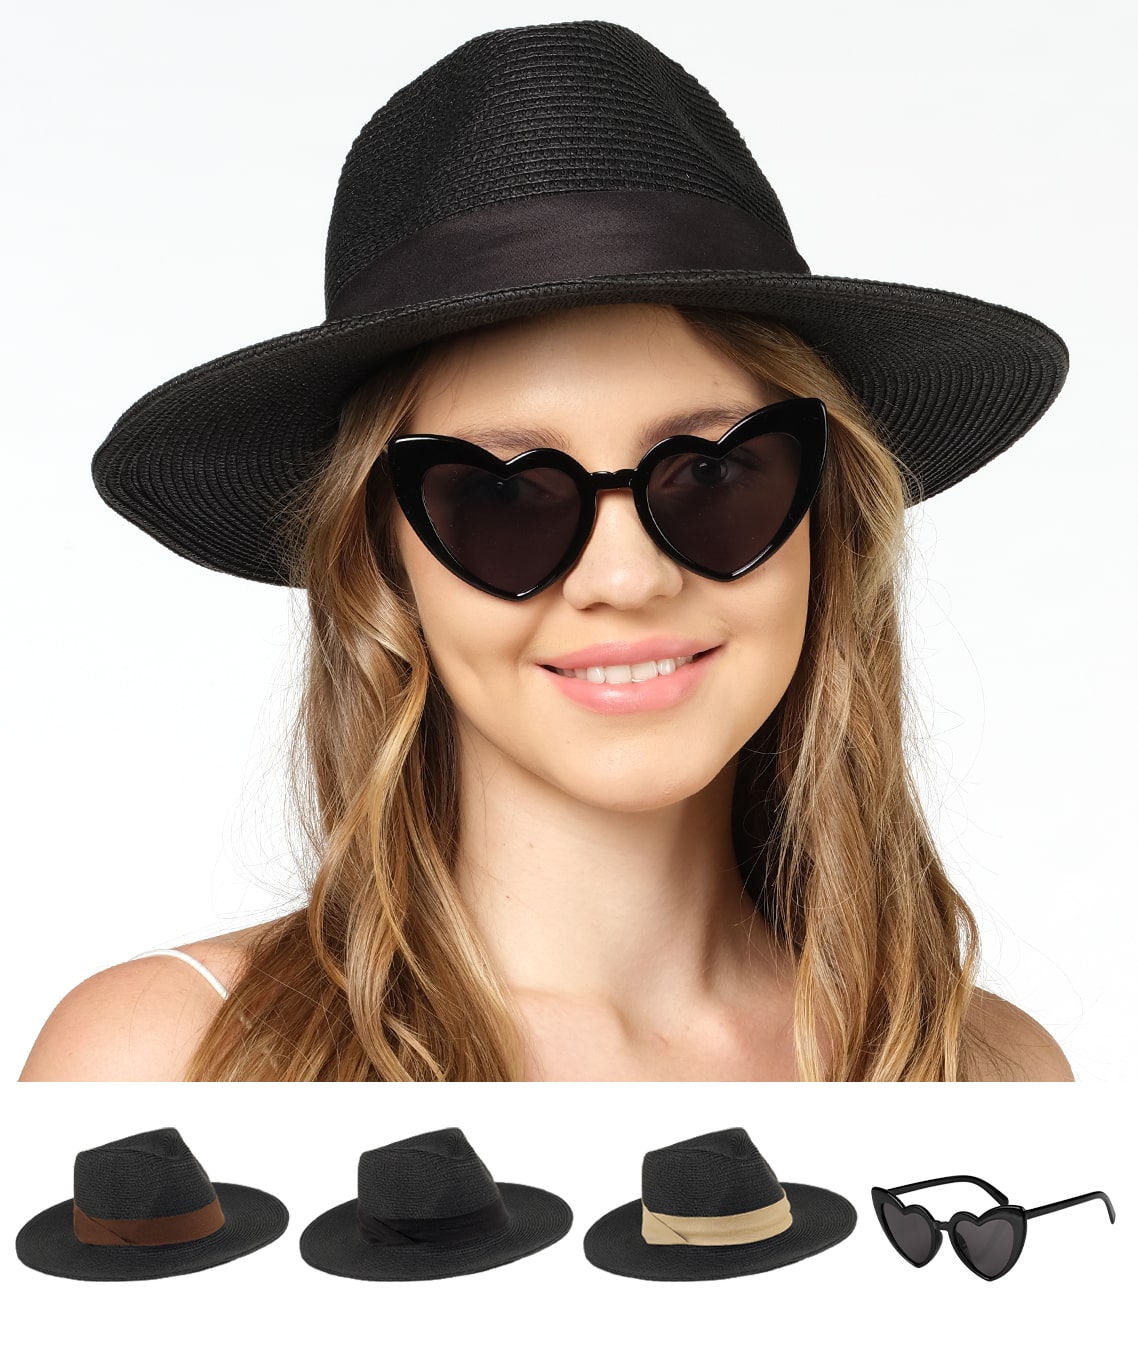 Funcredible Straw Fedora Hat for Women - Foldable Sun Hat - Packable Beach Hat - Panama Hat with Bows and Heart Shape Glasses